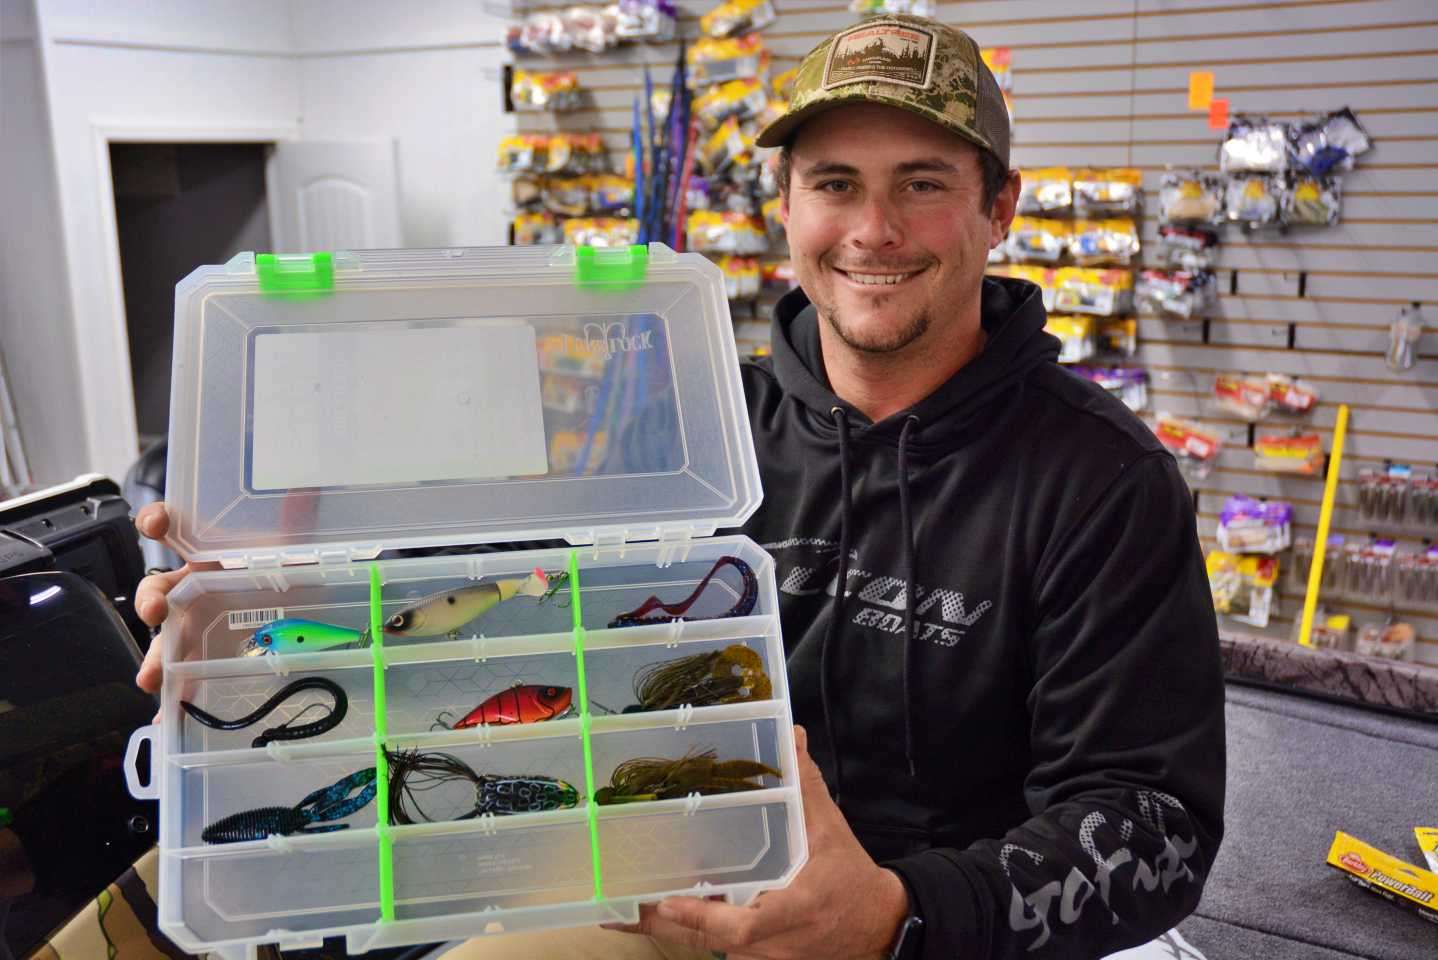 Atkins also uses the baits in the beginnerâs tacklebox throughout the season. âYou can get proficient in using them and get even better as you gain more skills.â 